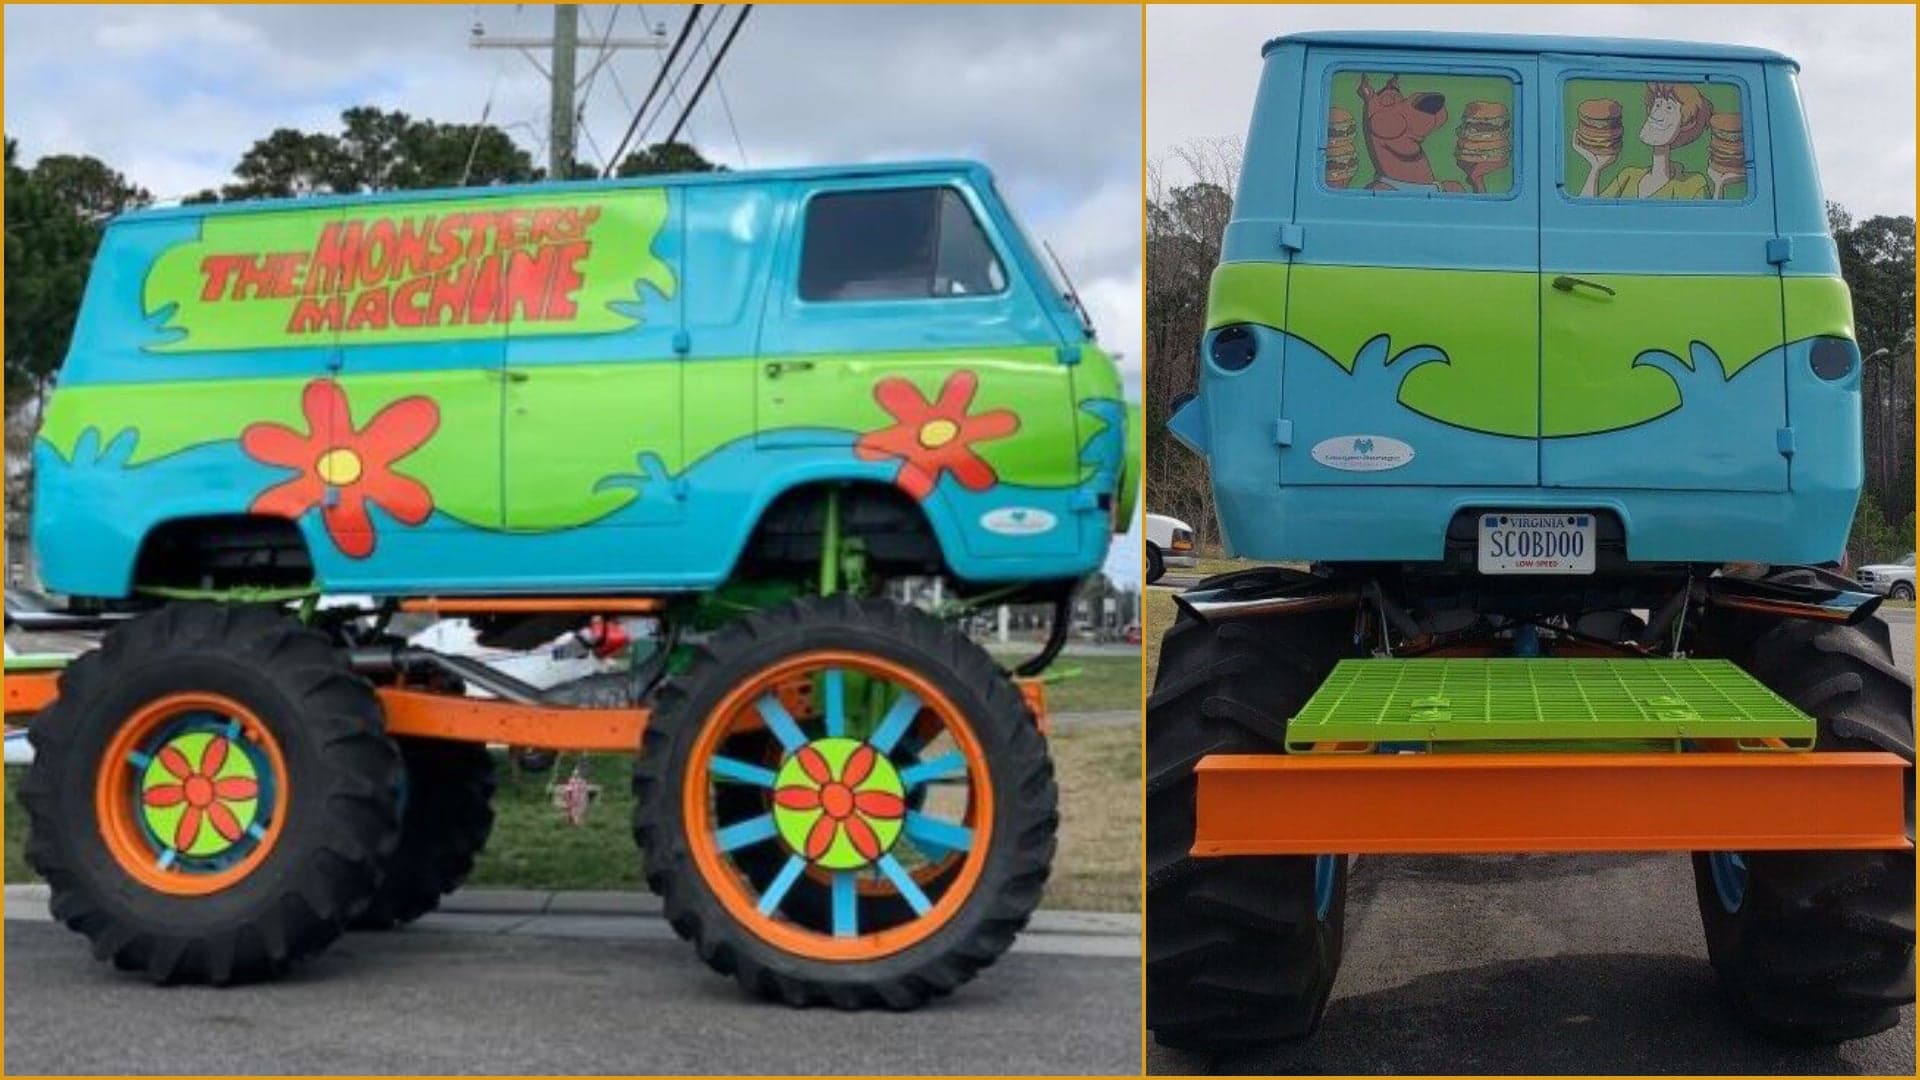 This Monster Mystery Machine Van Is One Giant Scooby Snack